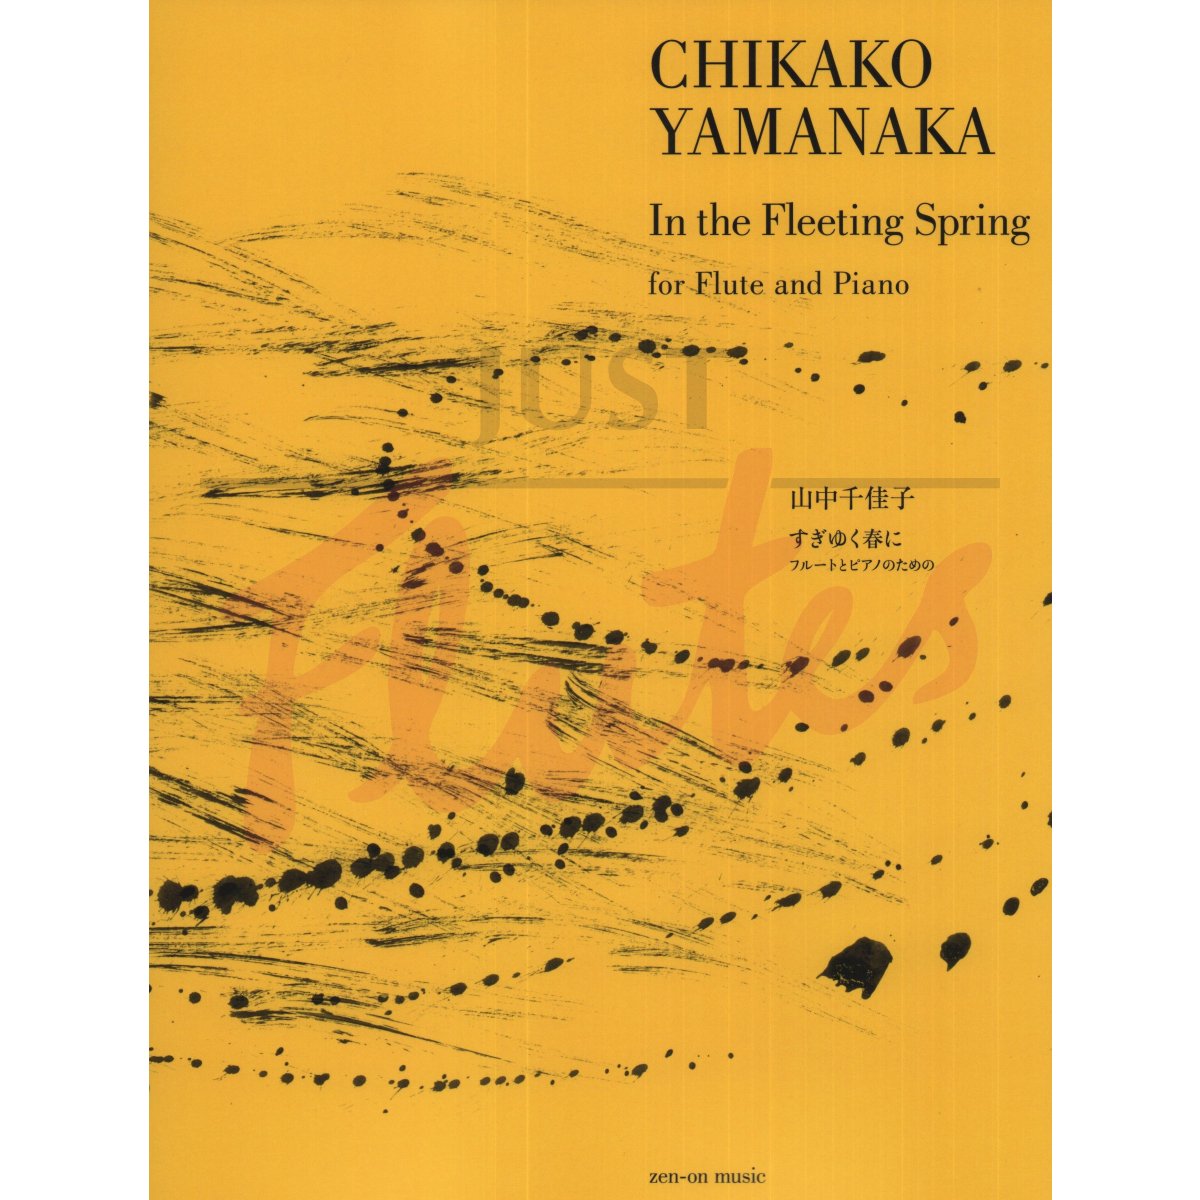 In the Fleeting Spring for Flute and Piano